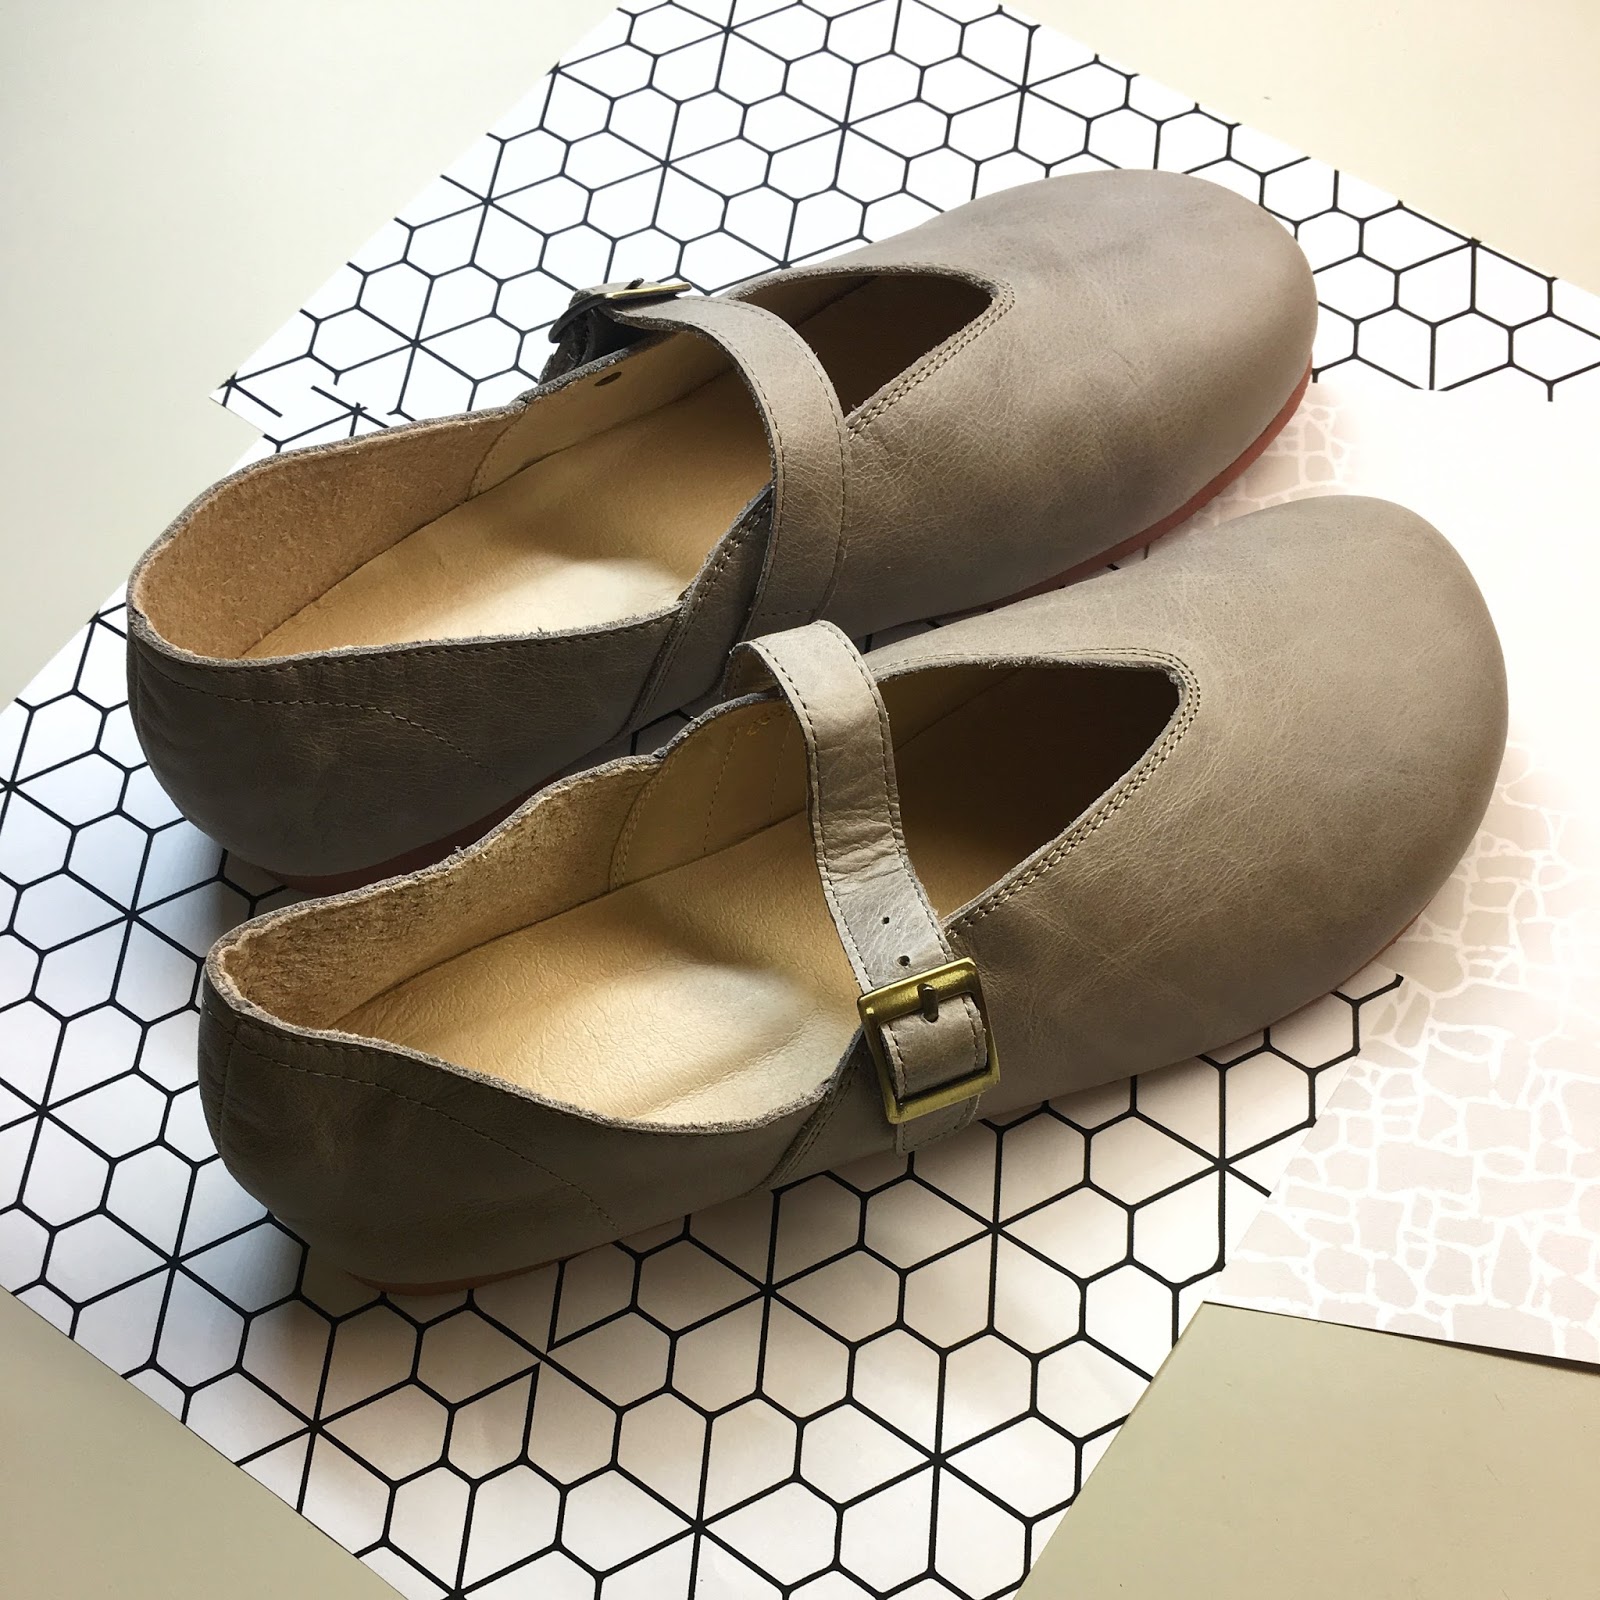 Trying Socofy Shoes - a little Newchic review